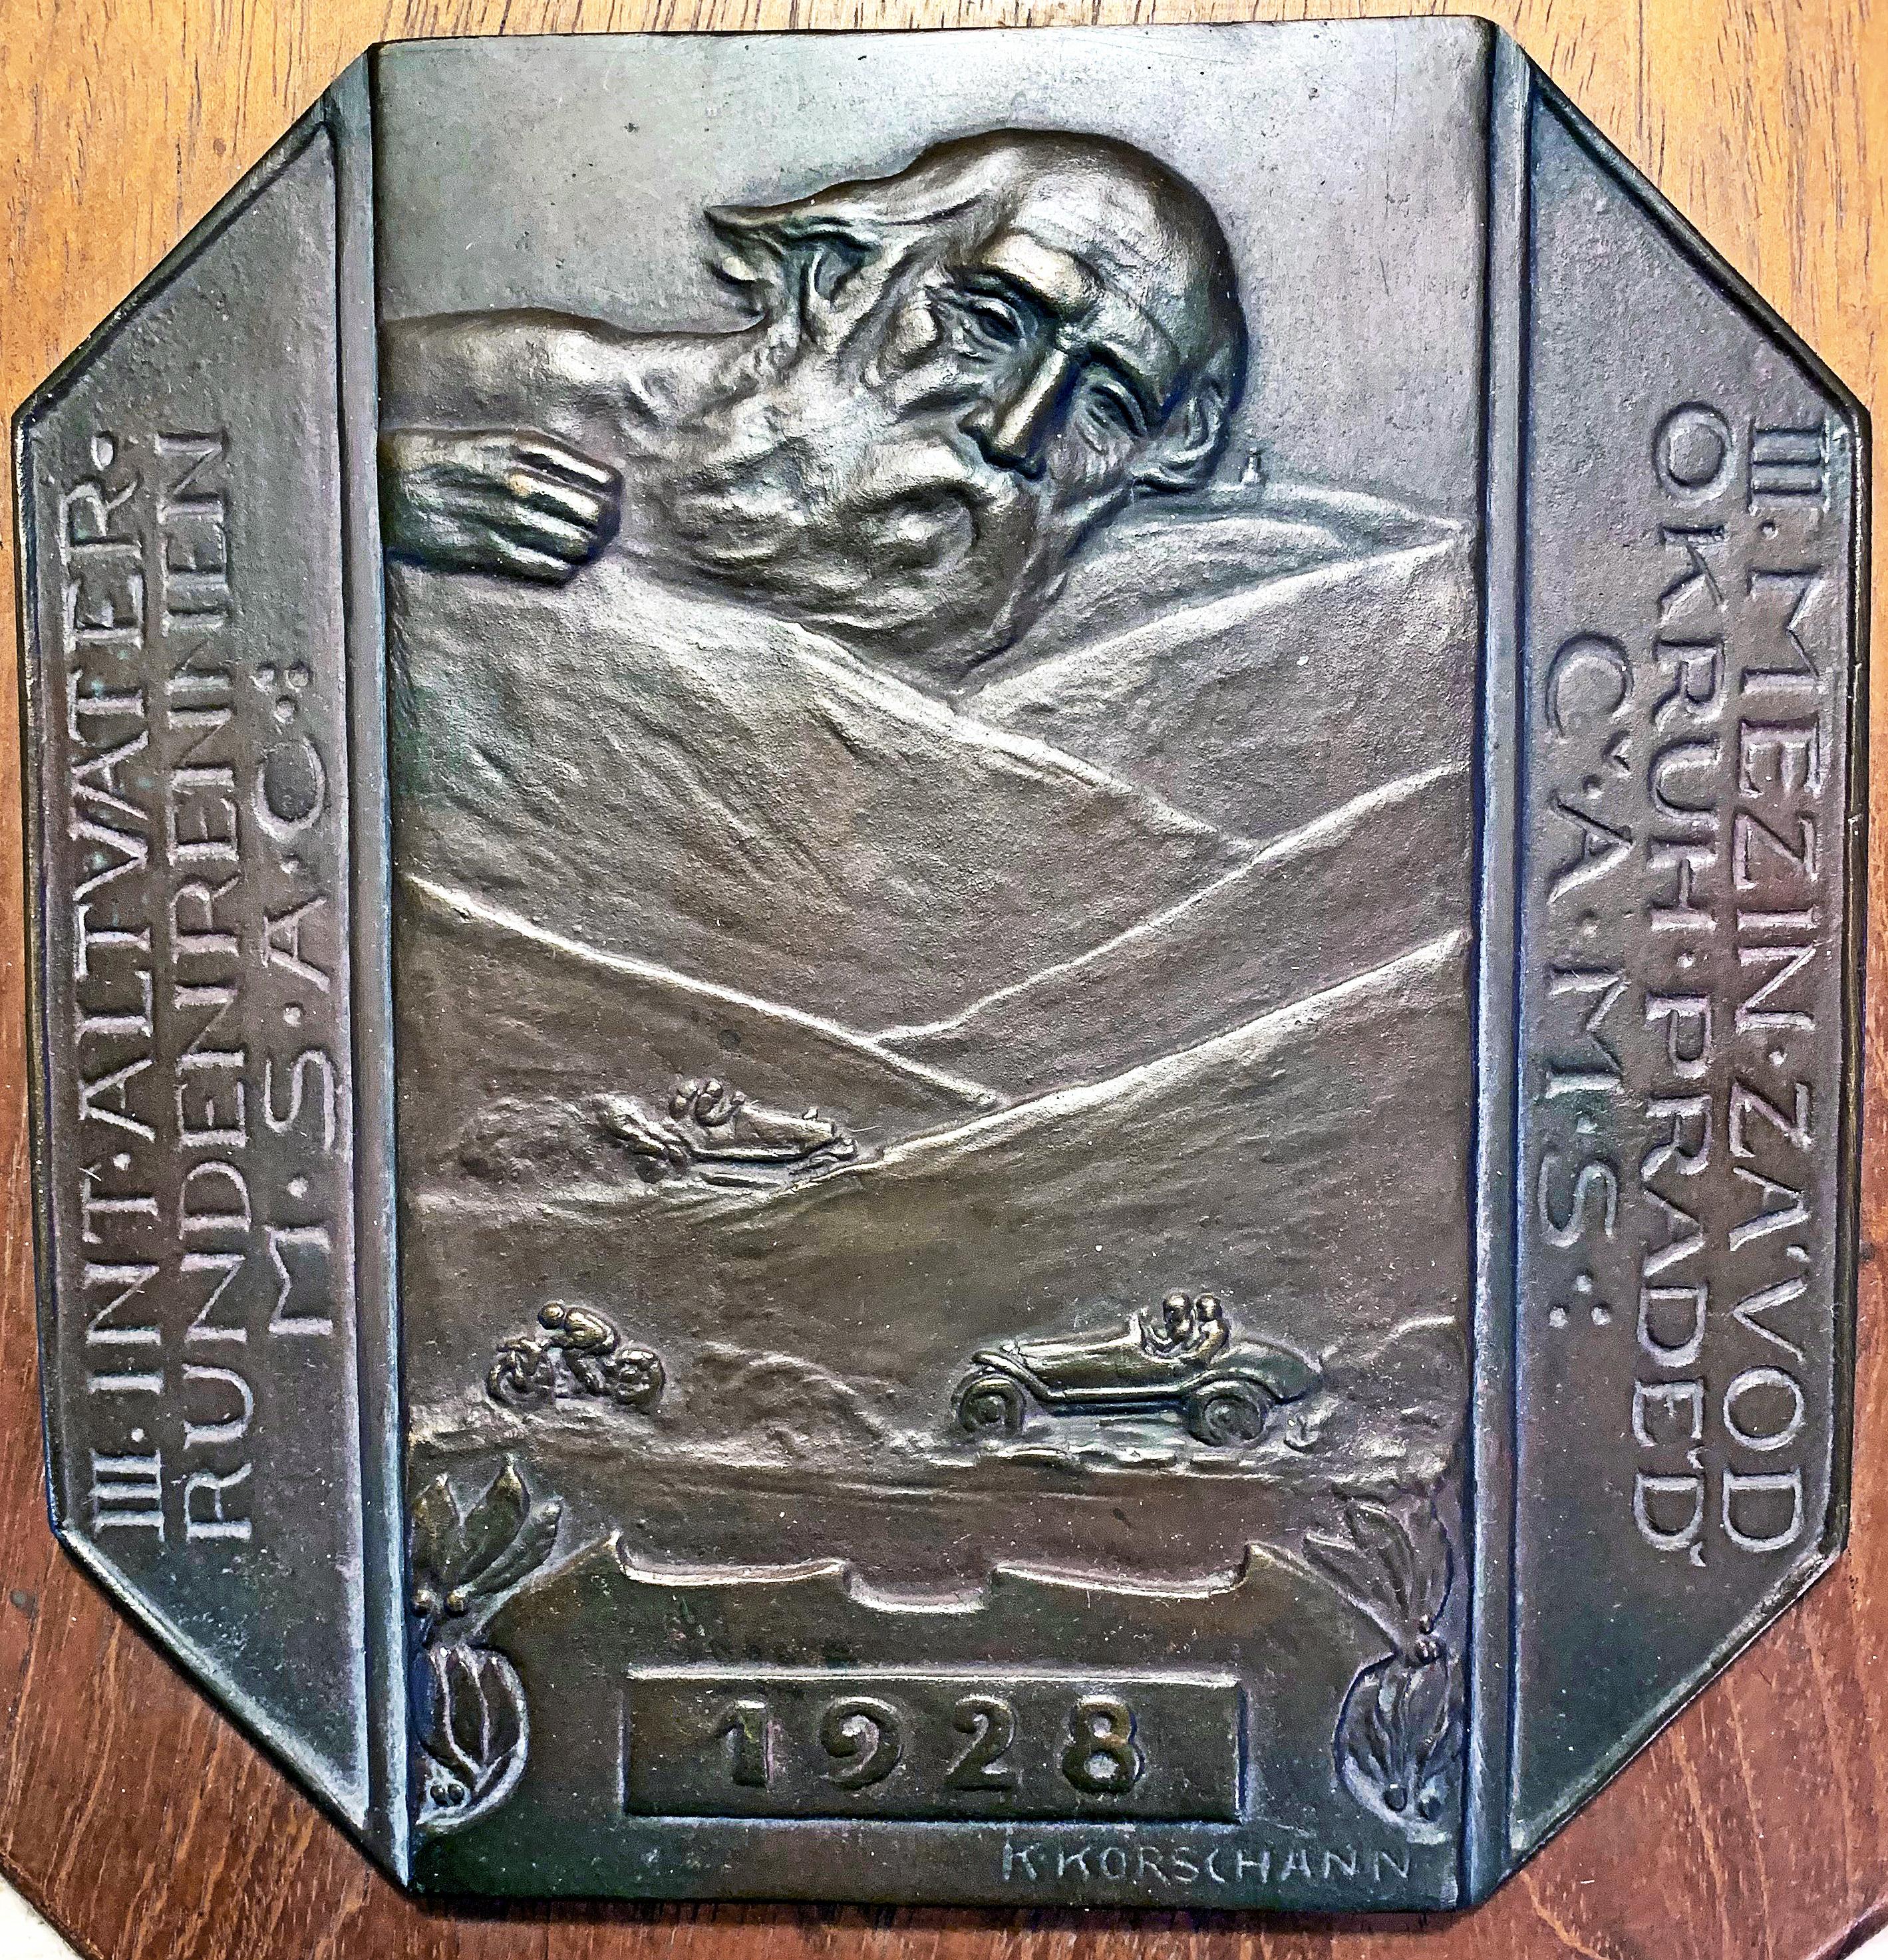 A very rare, perhaps unique, example of early automobiliana, this 1928 bronze panel, sculpted by Charles (or Karl) Korschann, celebrated one of the earliest road races in Europe, which at the time included both race cars and motorcycles. The race